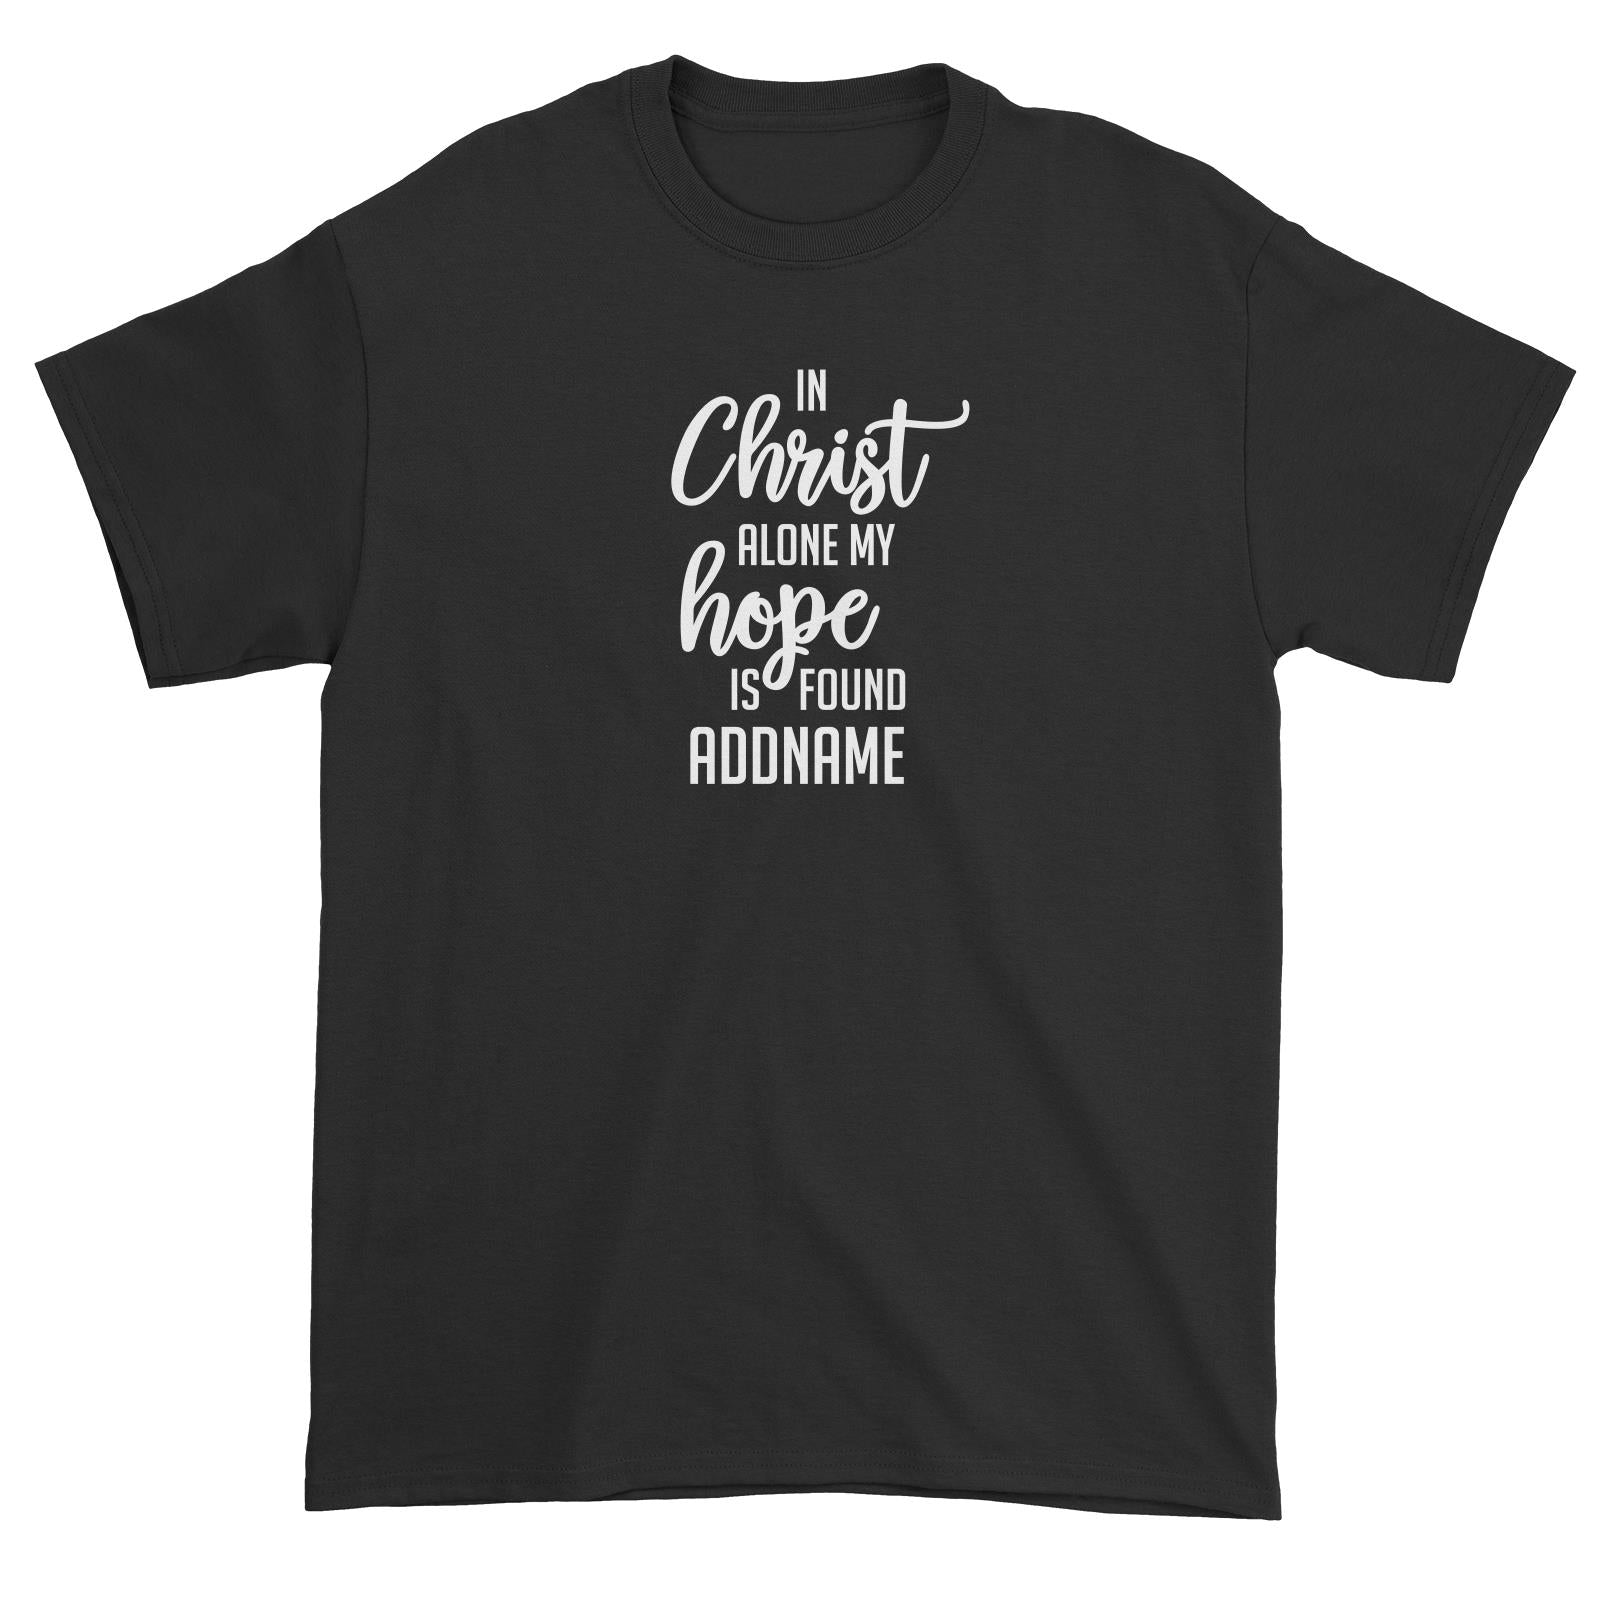 Christian Series In Christ Alone My Hope Is Found Addname Unisex T-Shirt